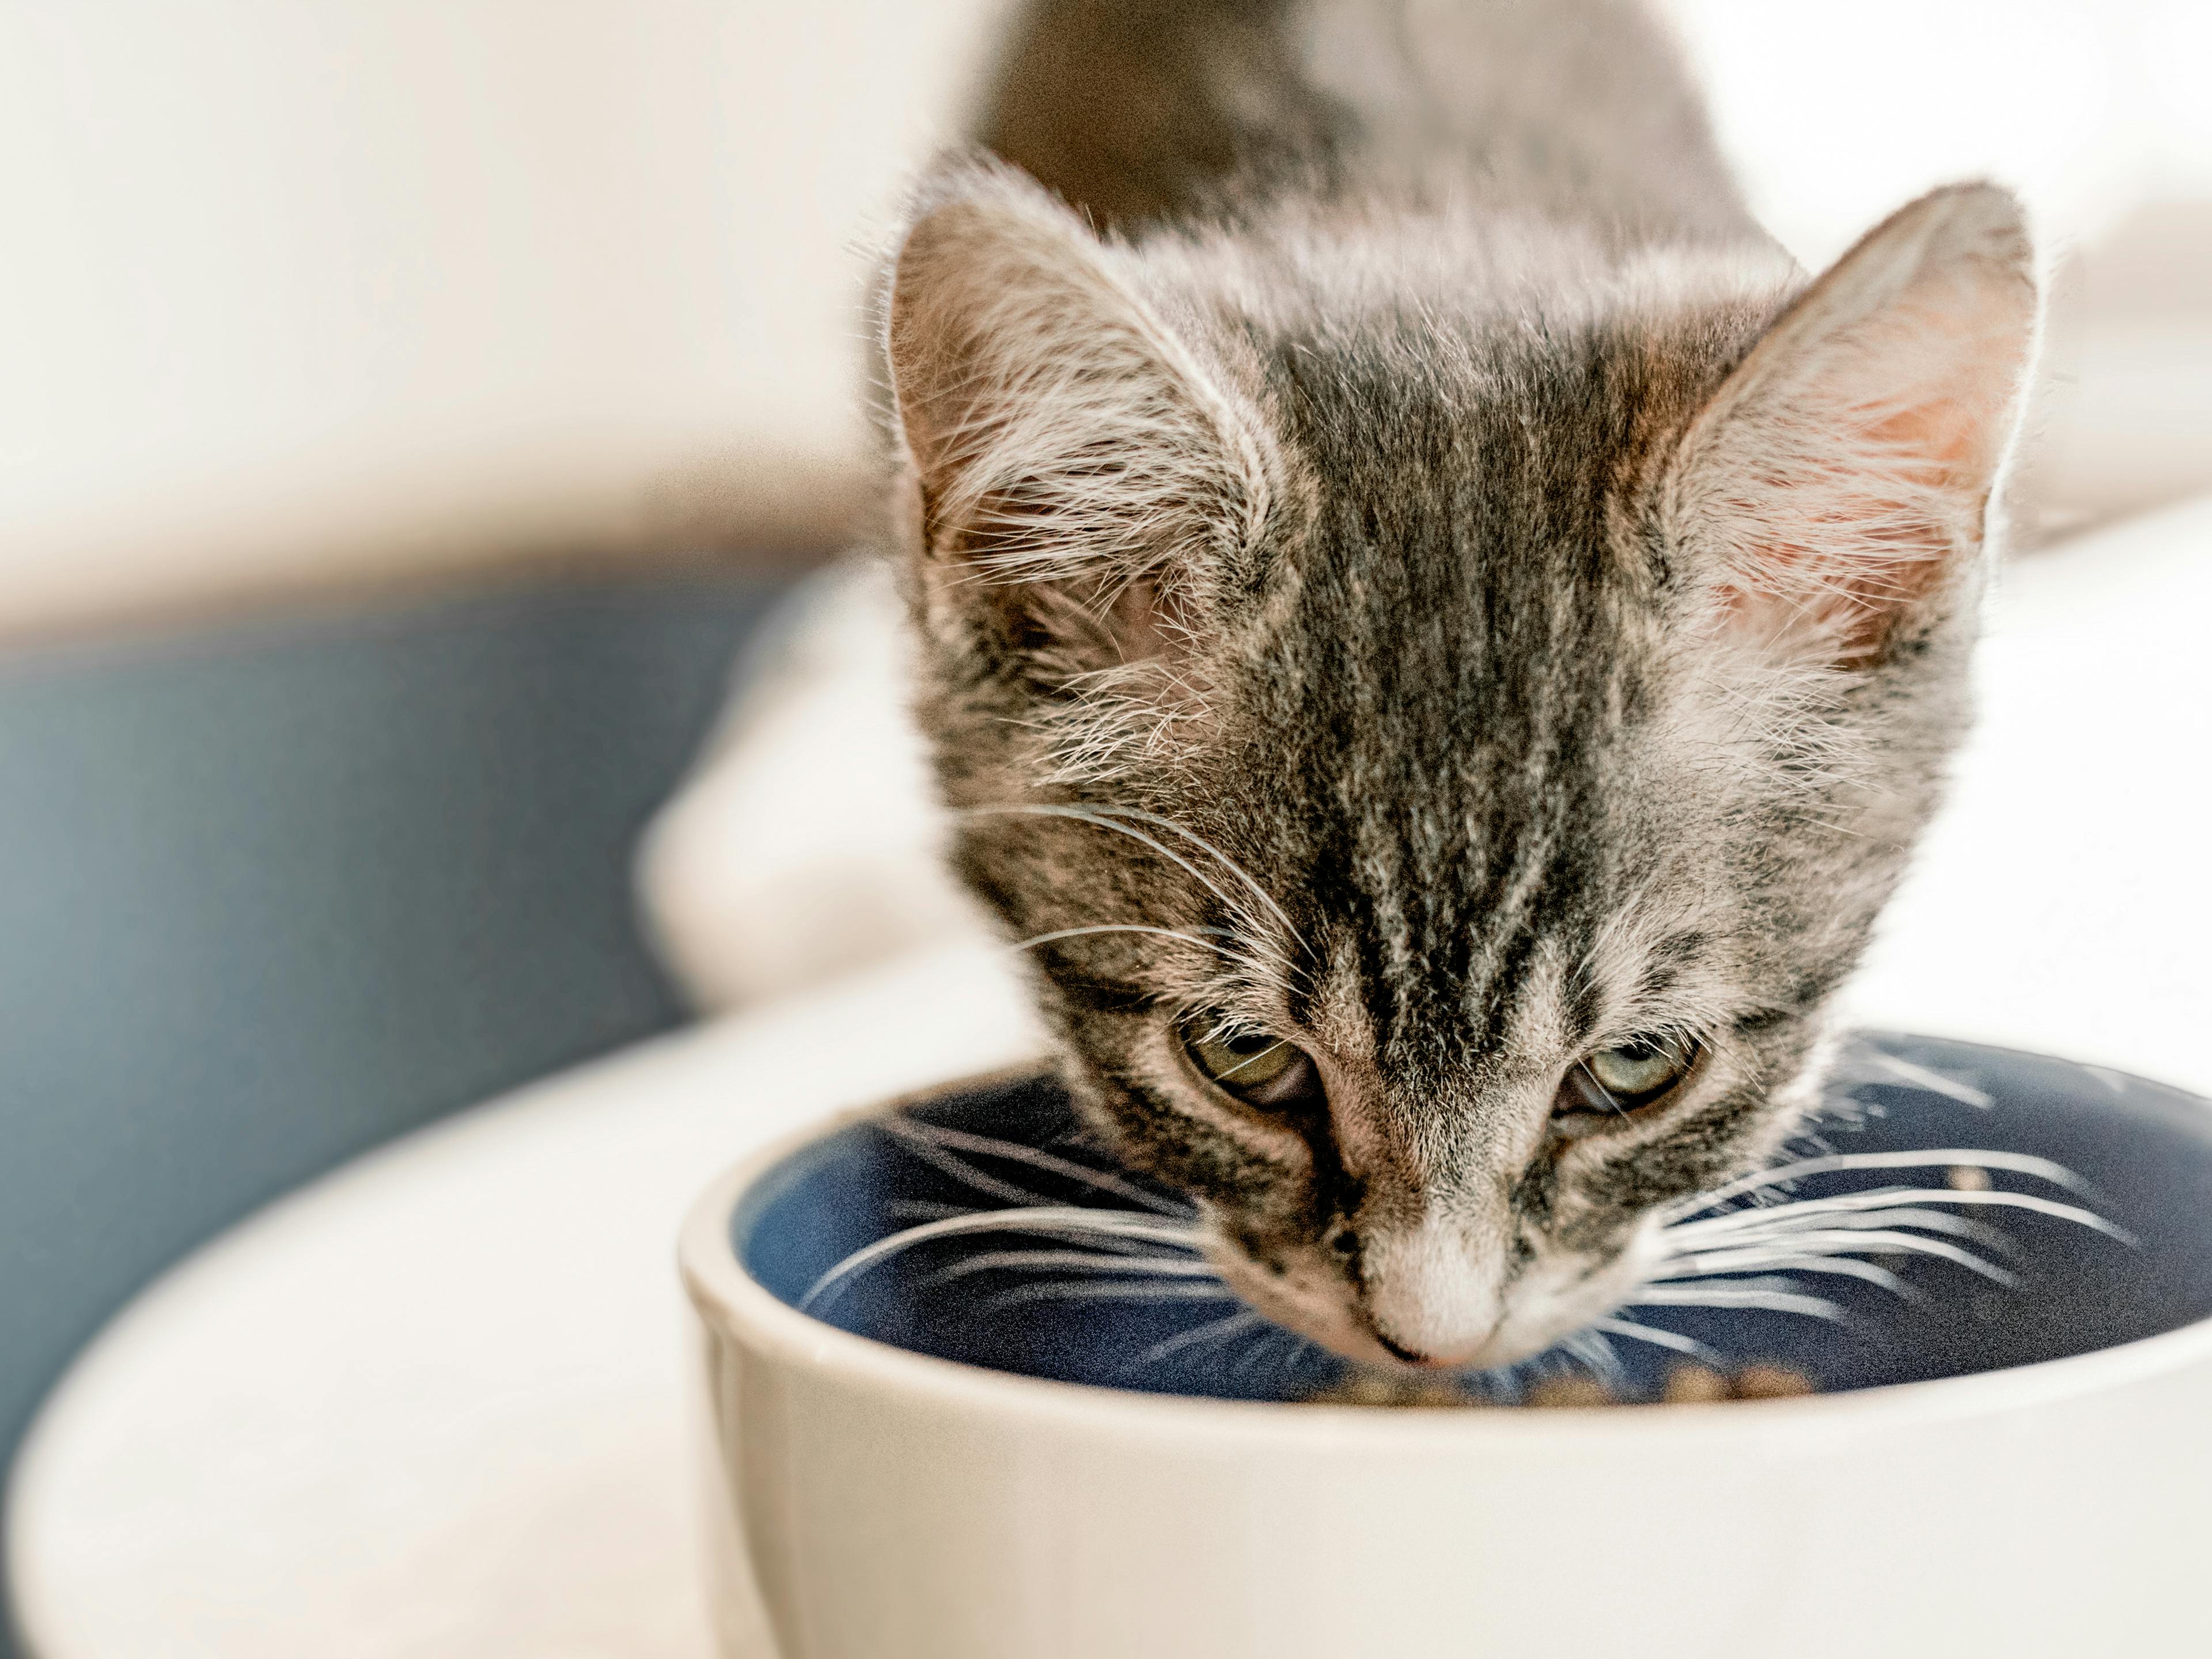 Grey kitten eating from a ceramic food bowl